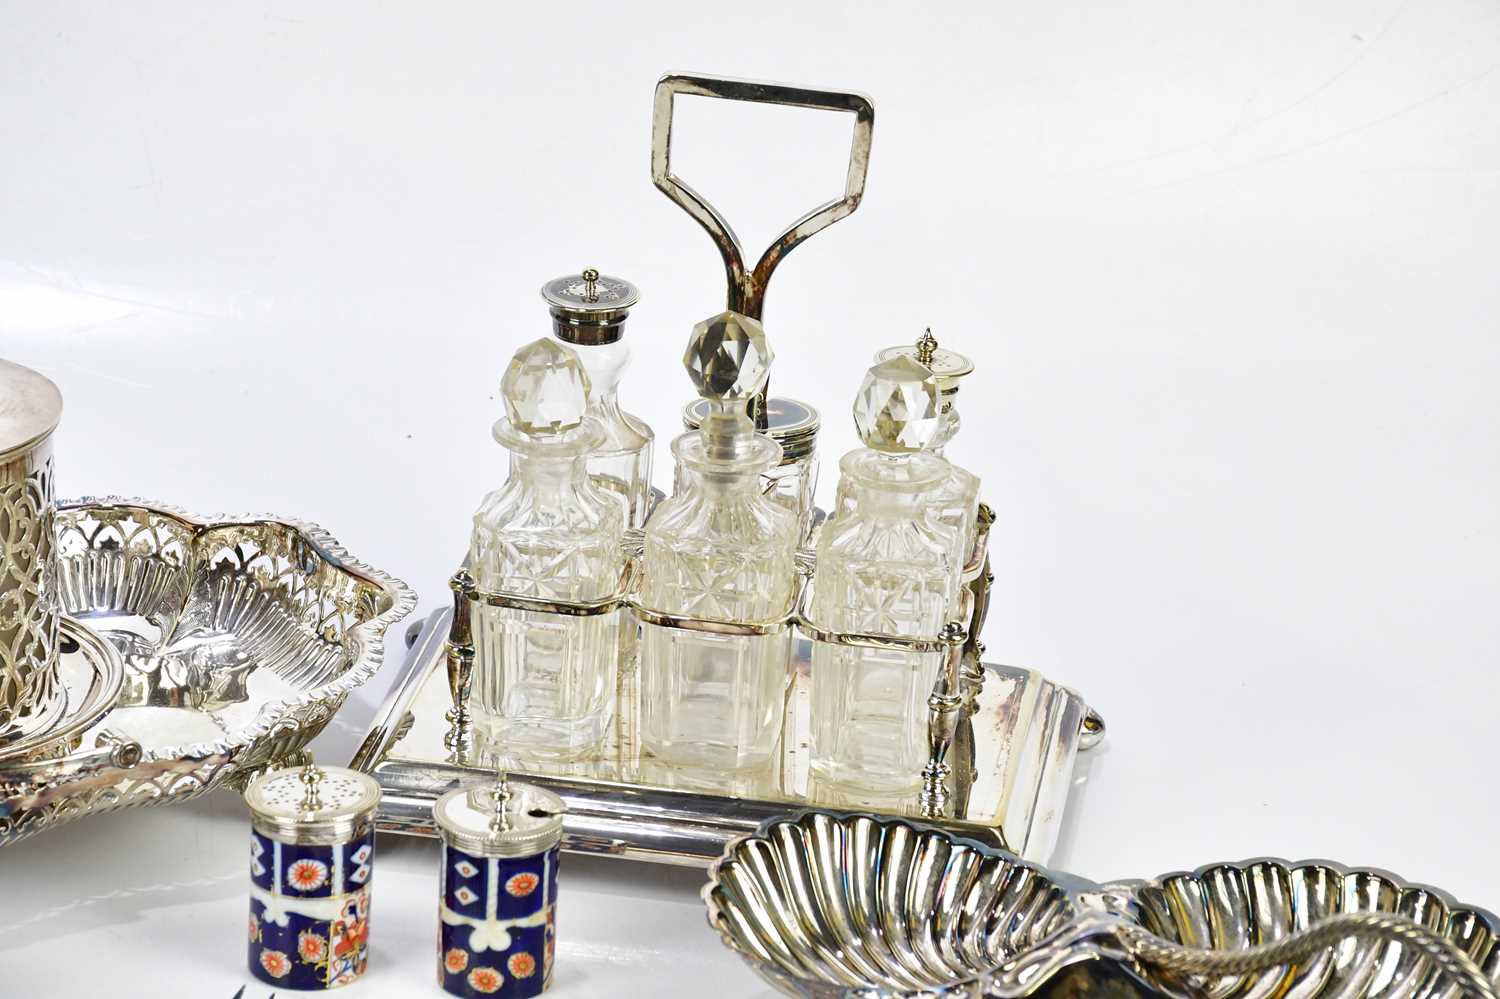 A small quantity of plated items including a condiment stand, fish servers and carving set with - Image 4 of 5